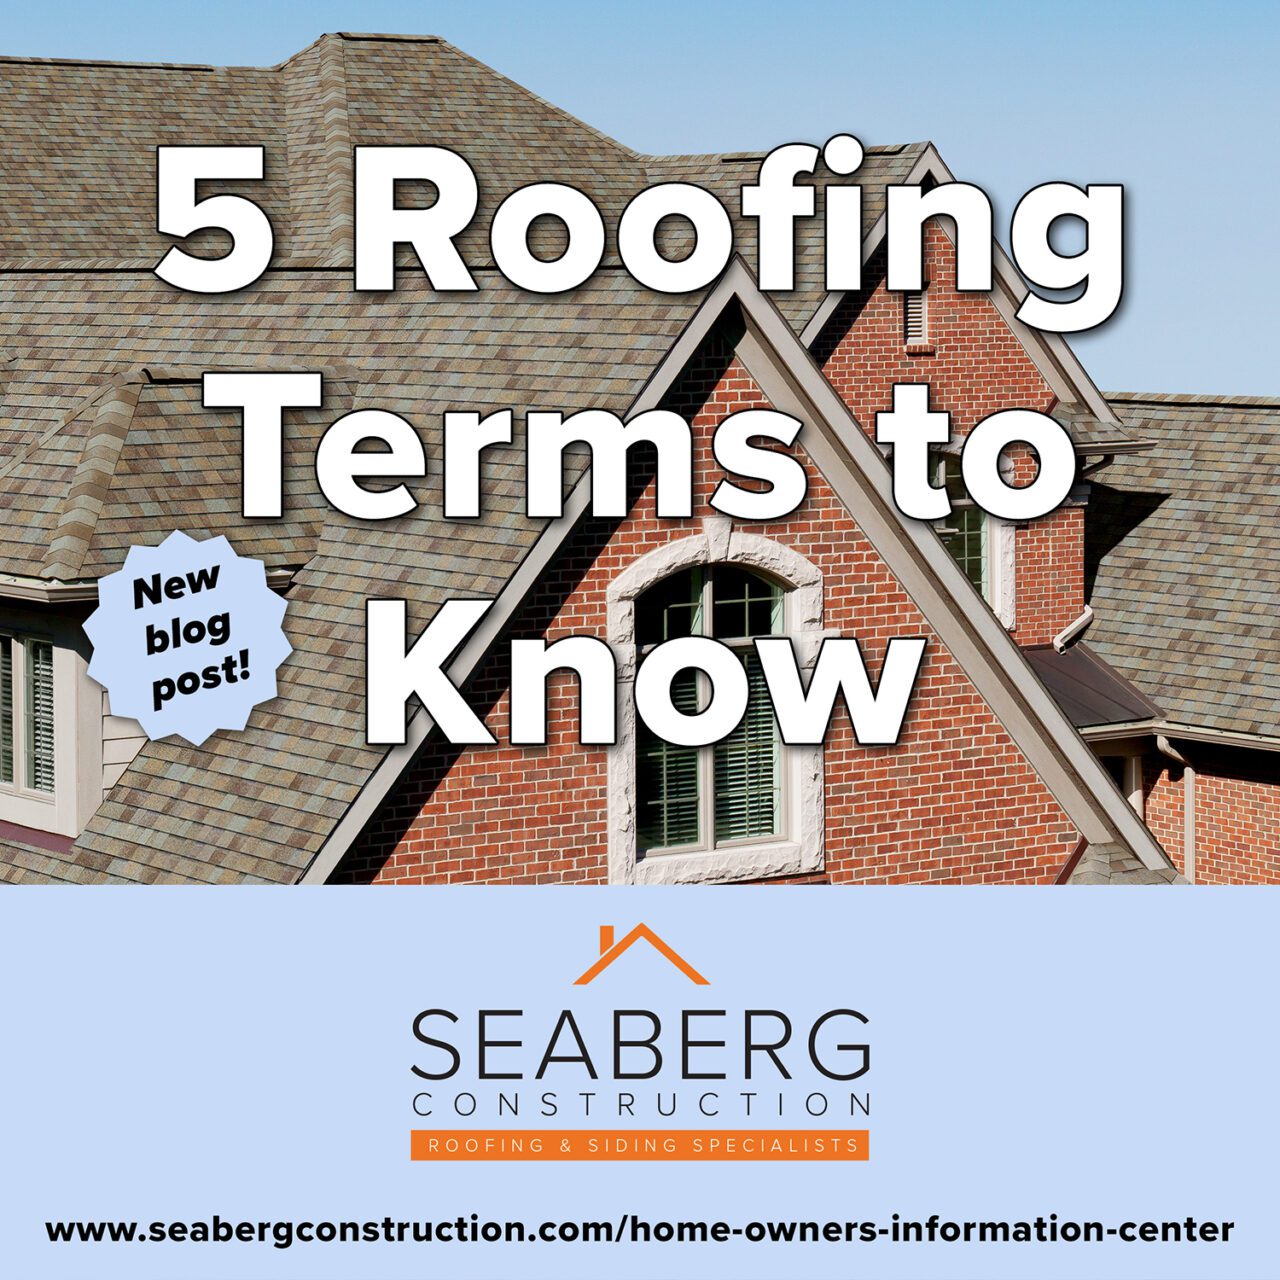 Seaberg Construction Blog: 5 Roofing Terms to Know